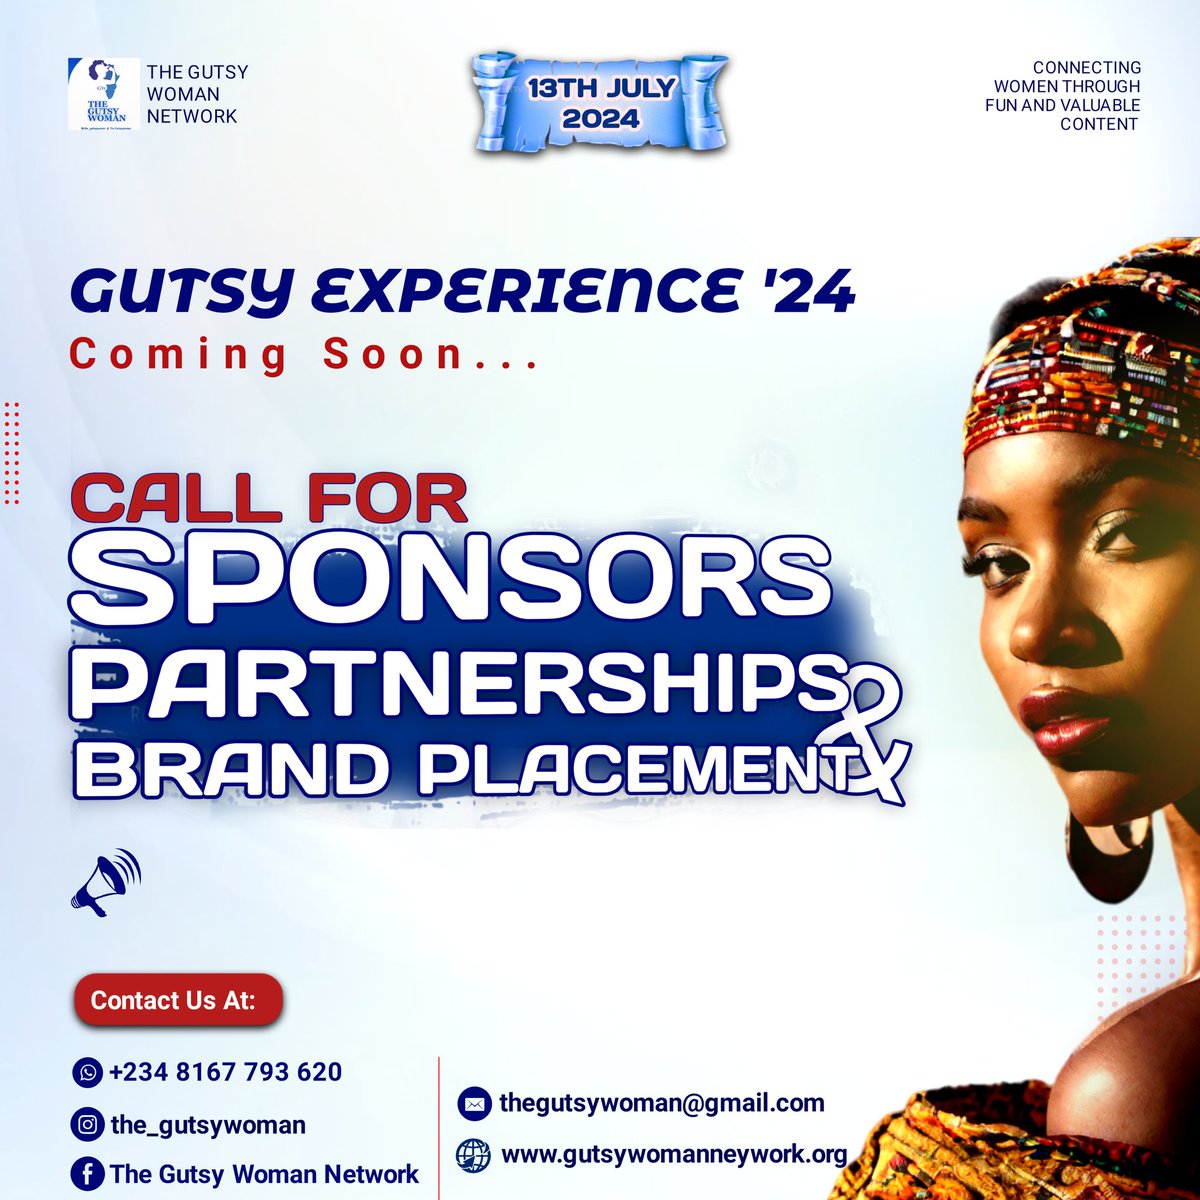 GUTSY EXPERIENCE '24
SAVE THE DATE!
FOR SPONSORSHIP, PARTNERSHIP AND BRAND PLACEMENT KINDLY SEND A DM OR WHATSAPP 08167793620. 
GUTSY EXPERIENCE, CONNECTING WOMEN THROUGH VALUABLE CONTENT AND FUN.
#begutsy 
#thegutsywoman
#Godandgutsy 
#womencommunity 
#womenofimpact 
#influence